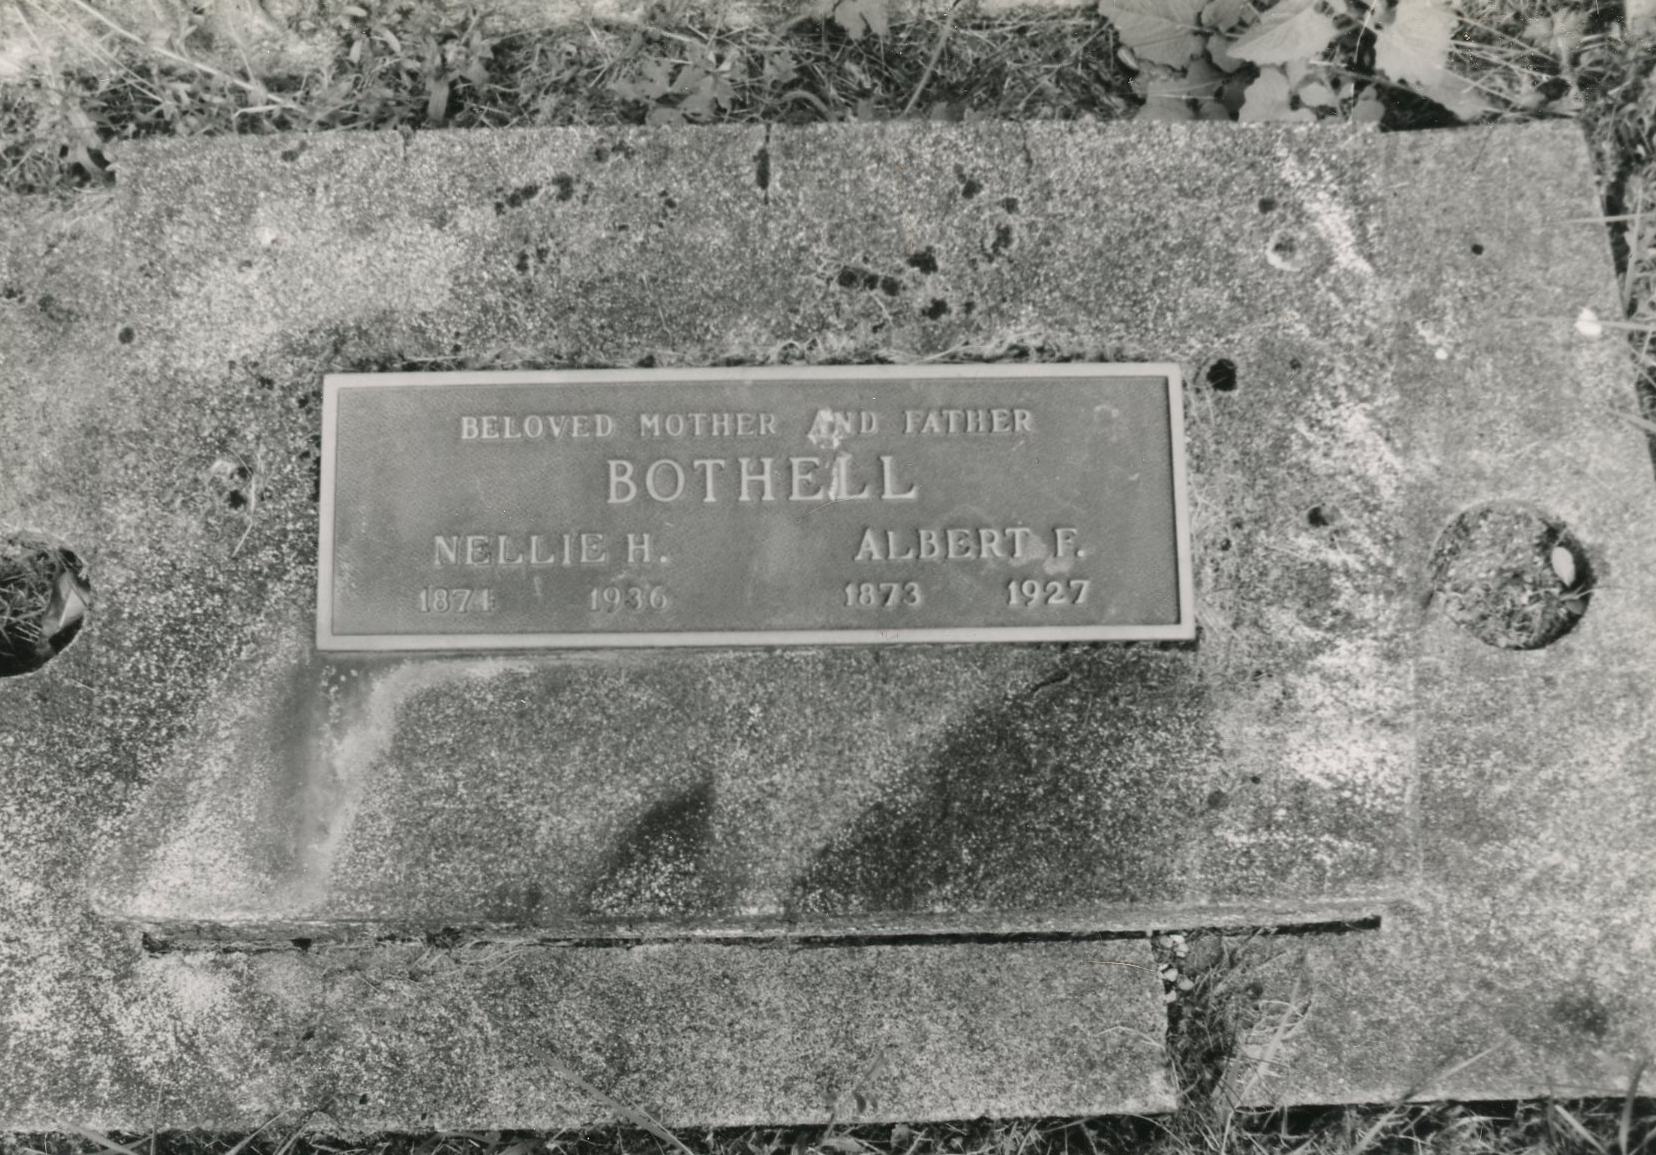 Bothell, Nellie H